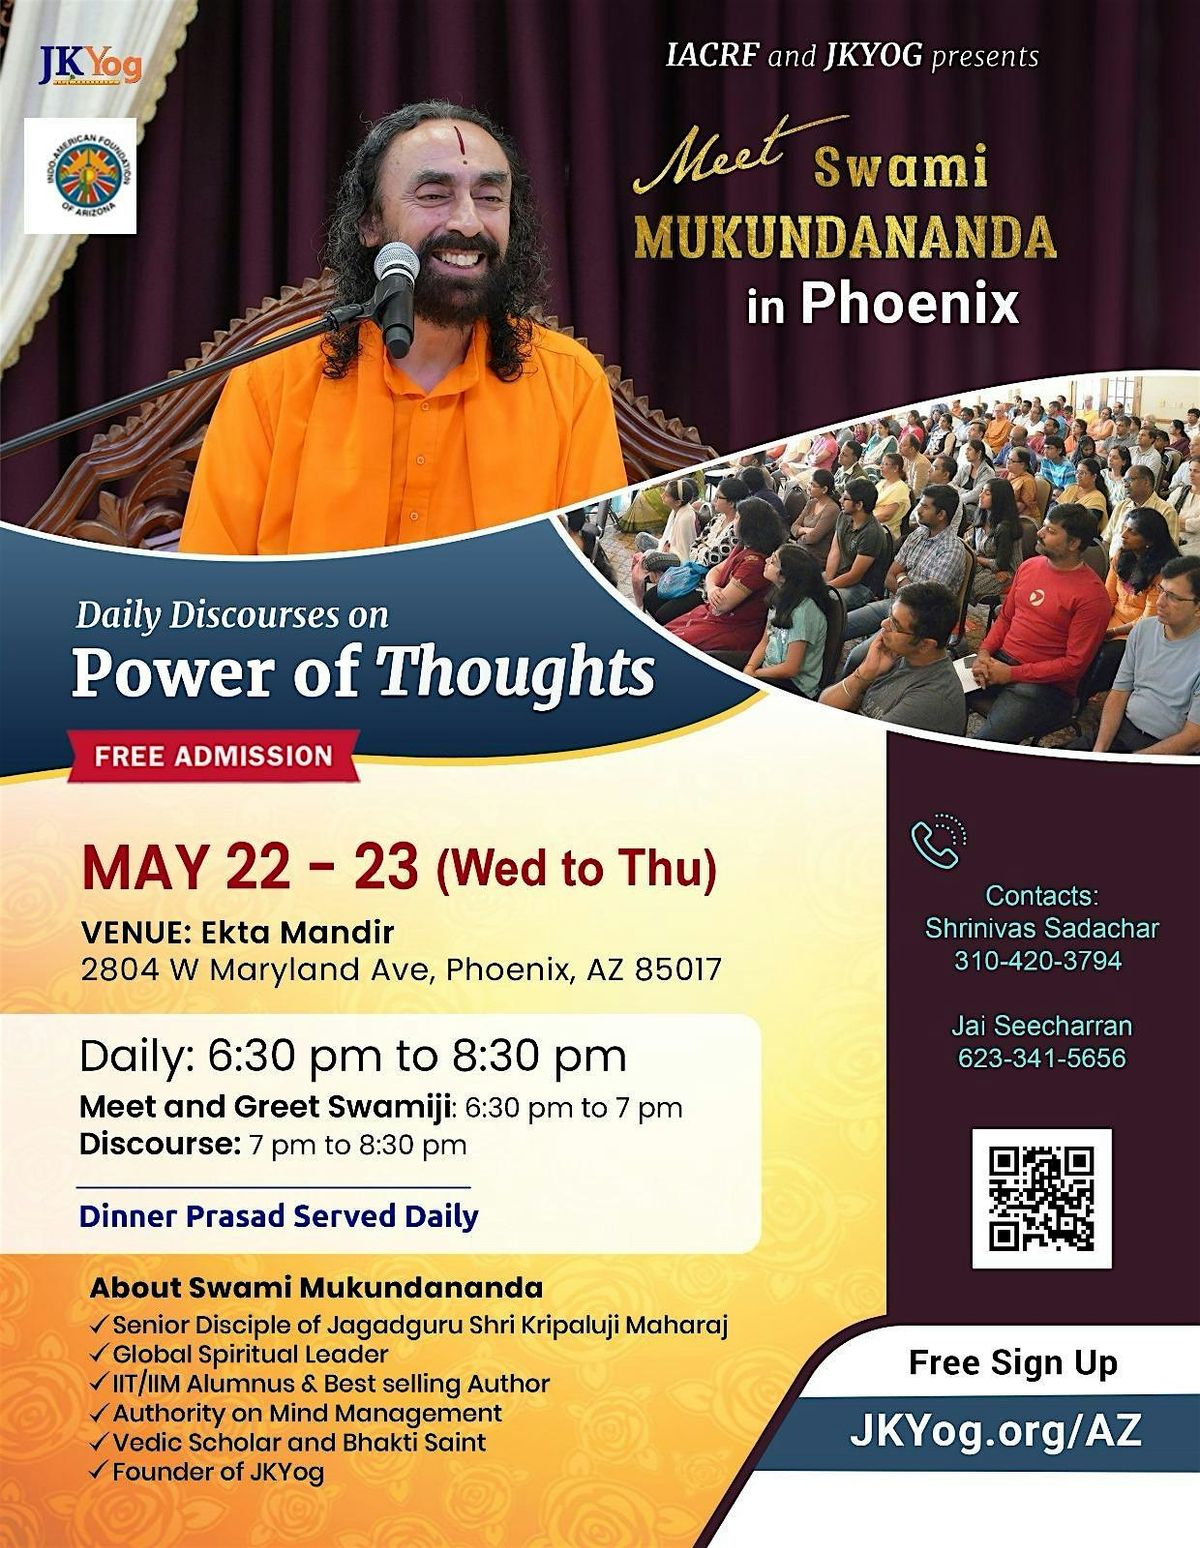 Daily Discourses on- Power Of Thoughts By Swami Mukundananda